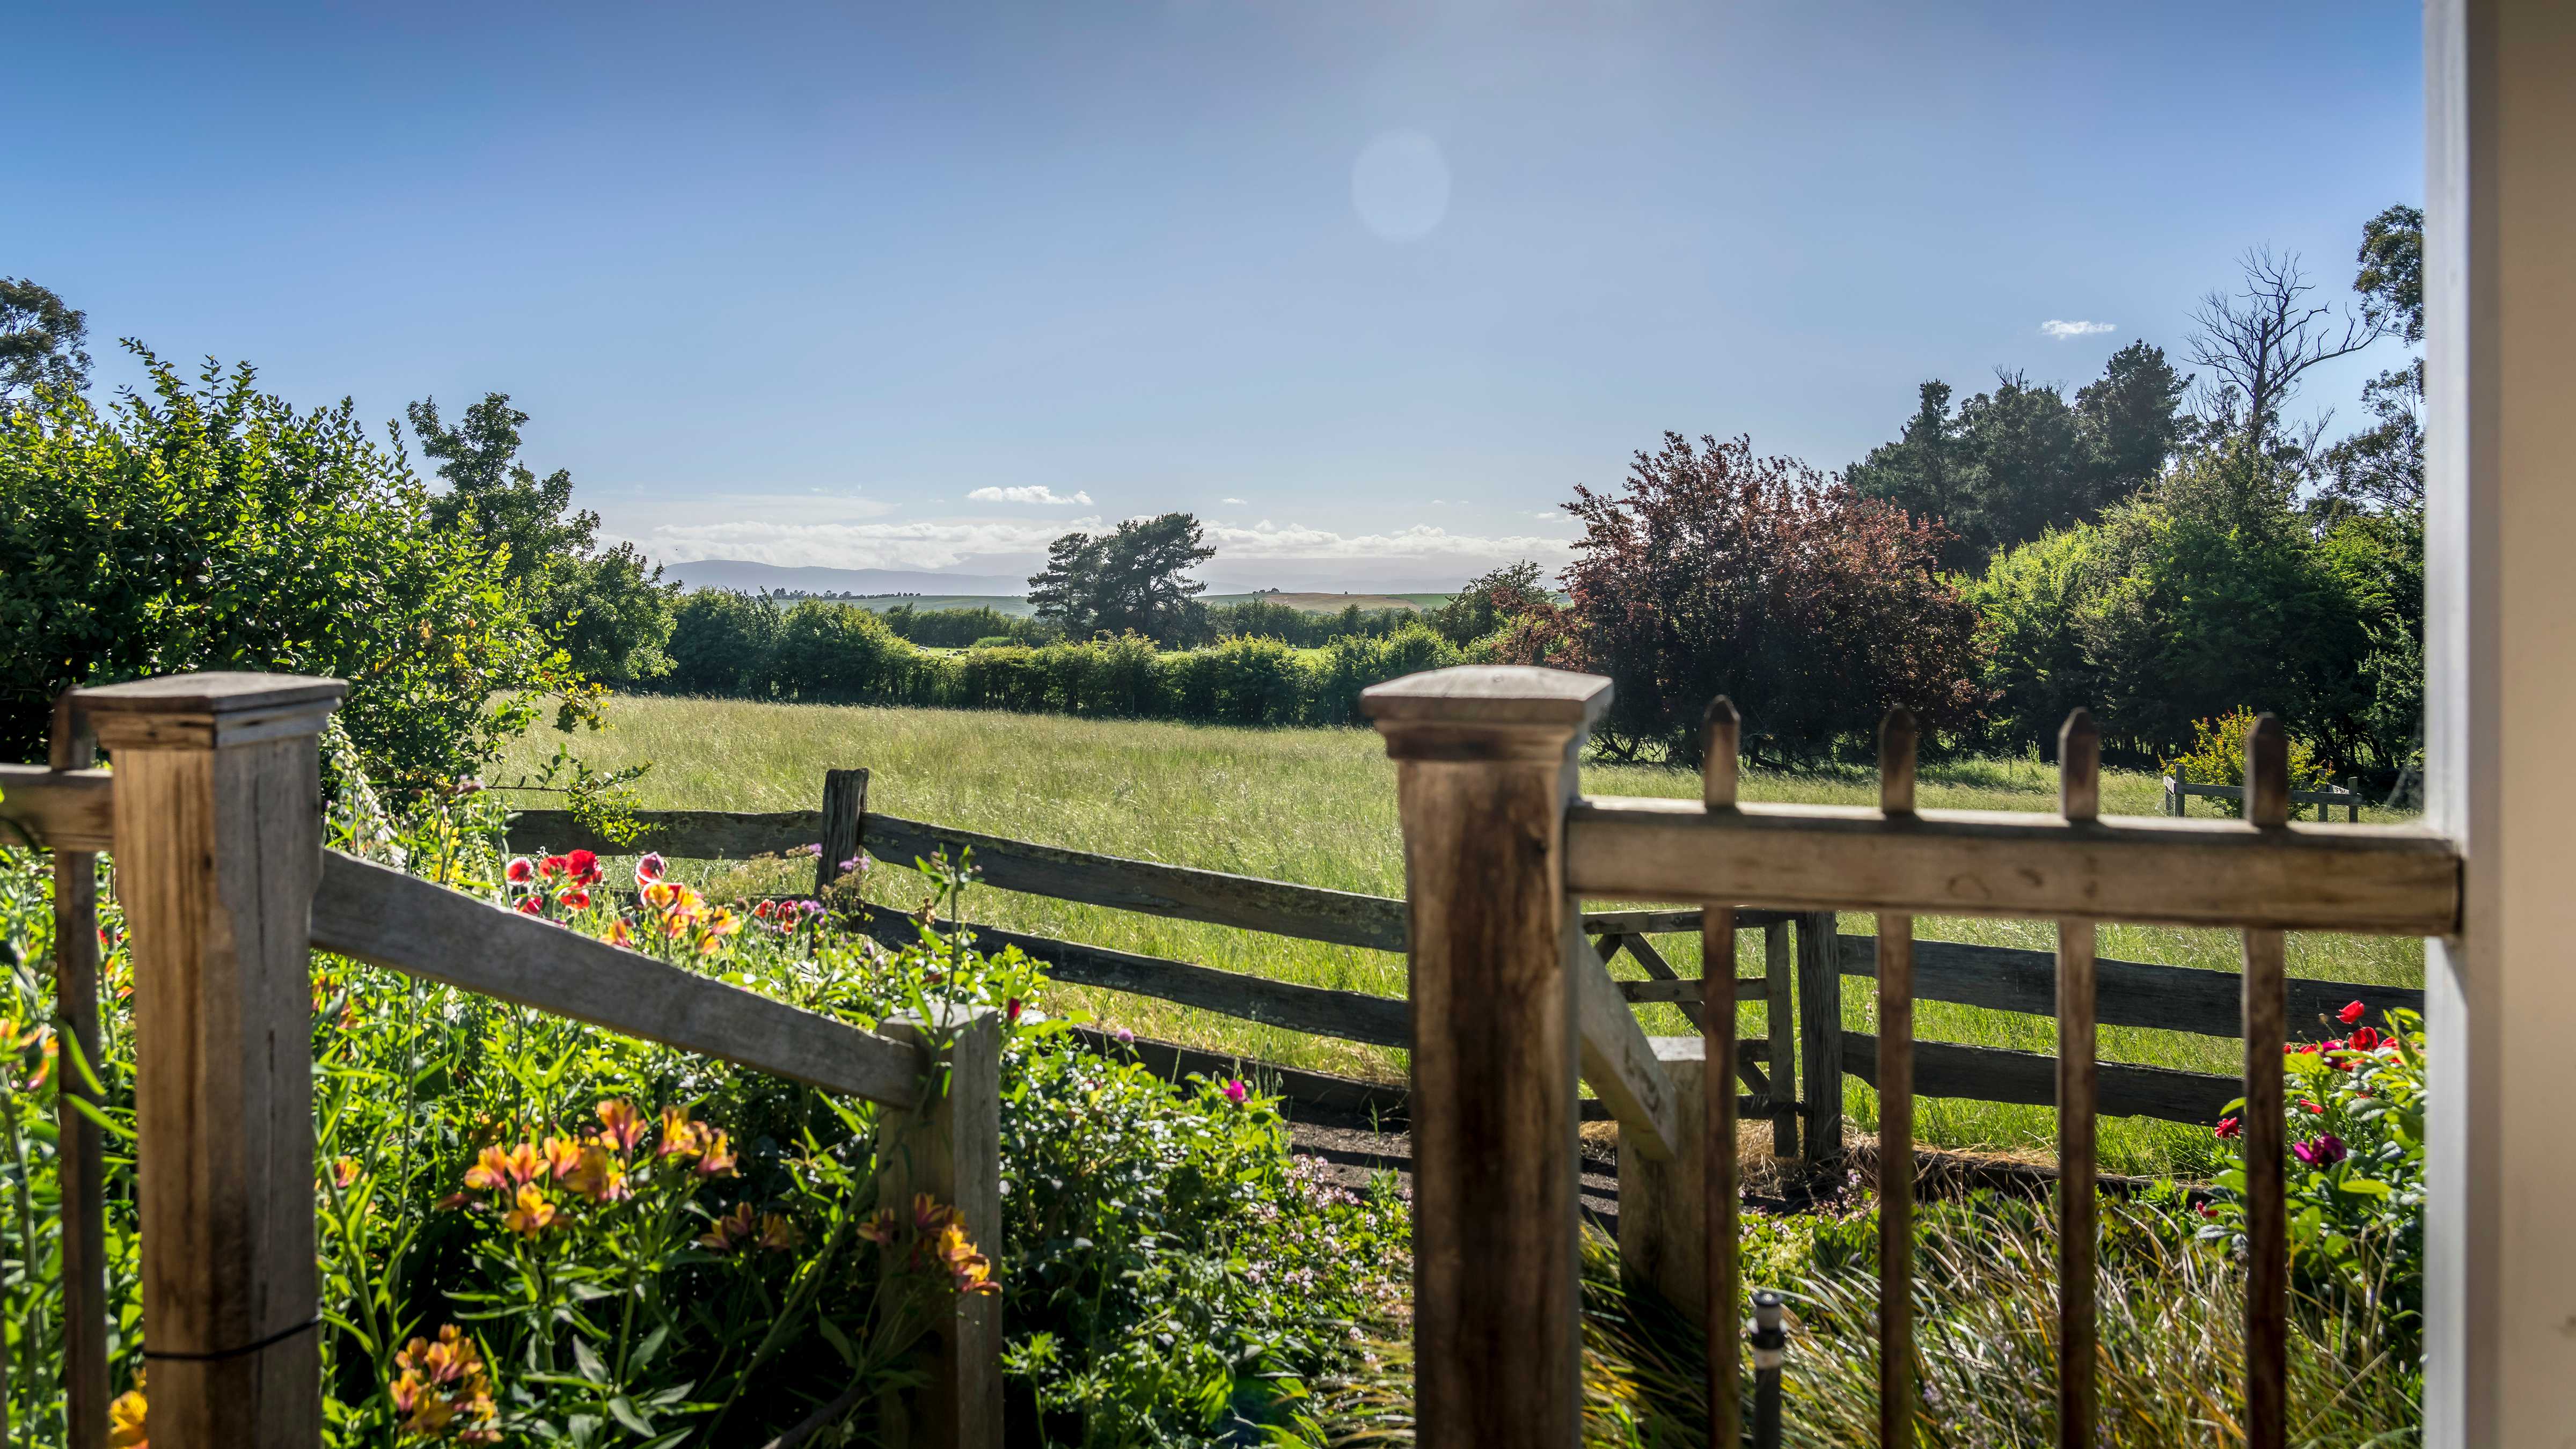 Wooden verandah posts looking out to a cottage garden with poppies, roses and green foliage. Beyond the garden is a post and rail fence with a field of grass and hawthorn hedgerows beyond. In the distance is a large pine tree and mountain range. Photo: Rob Burnett.